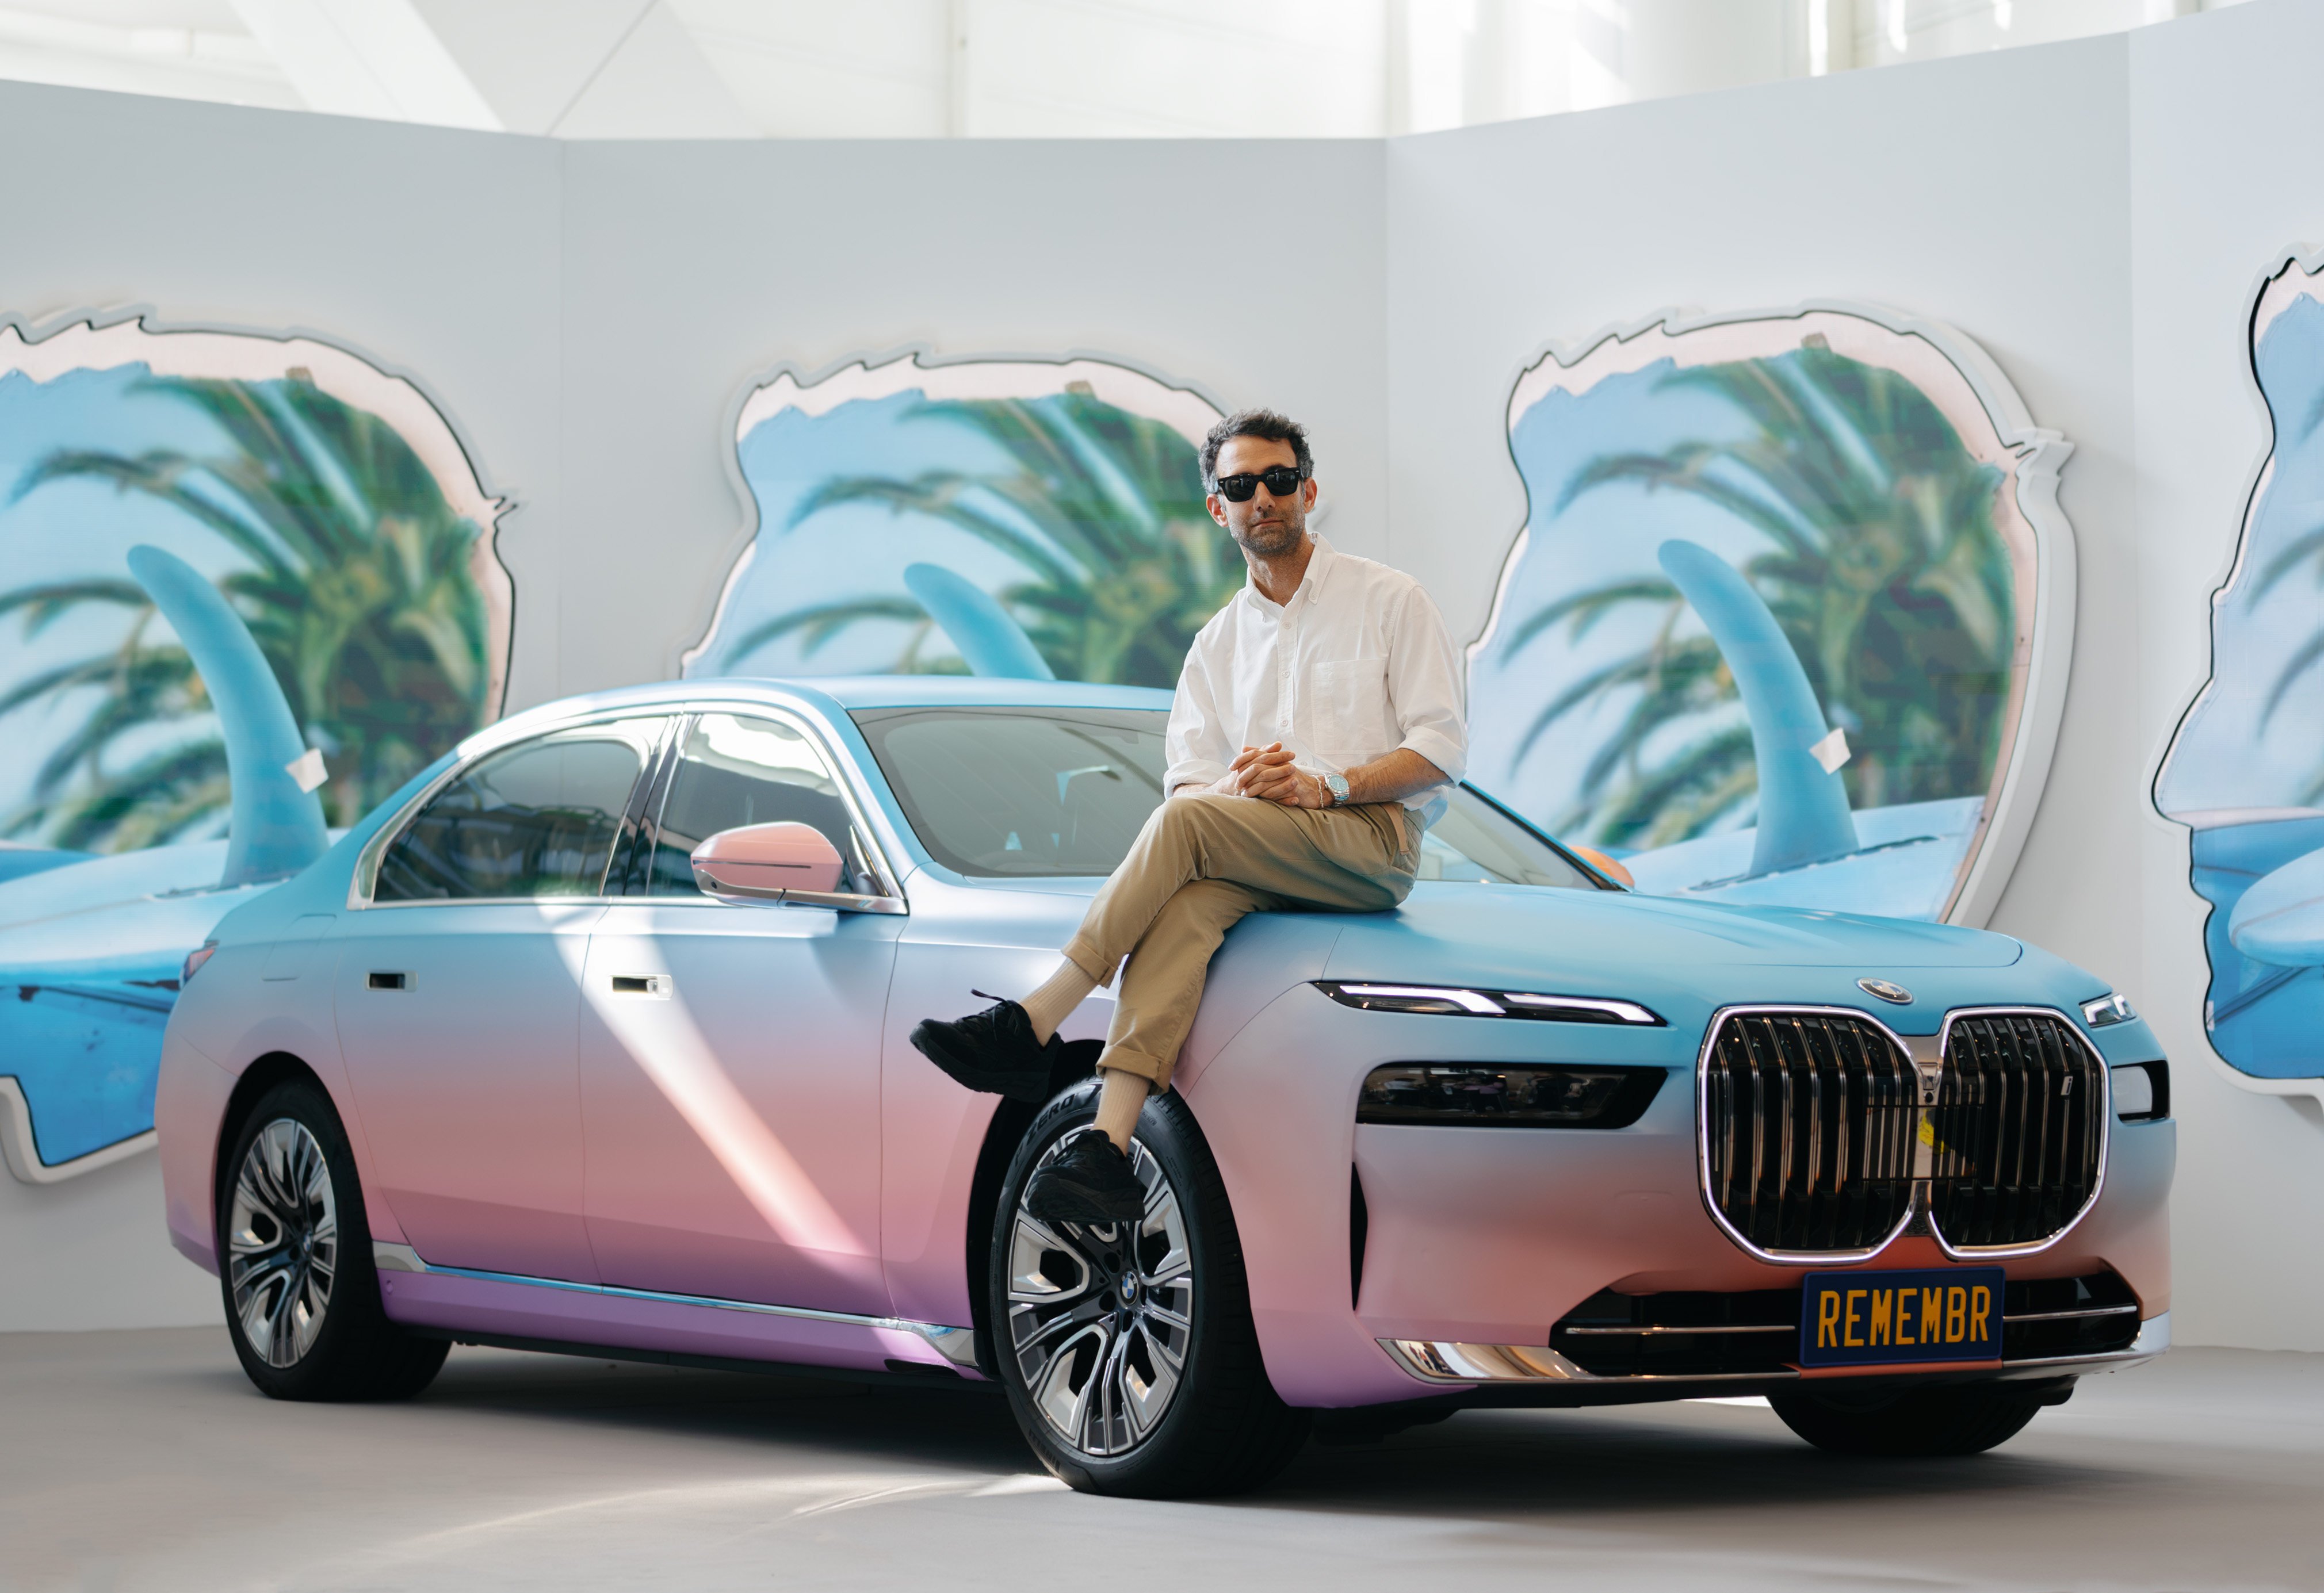 BMW’s all-electric i7 car appeared at March’s Art Basel Hong Kong in collaboration with an AI-driven experience designed by artist Alex Israel – just the latest in the brand’s creative tie-ups that have even involved Jeff Koons and Roy Lichtenstein